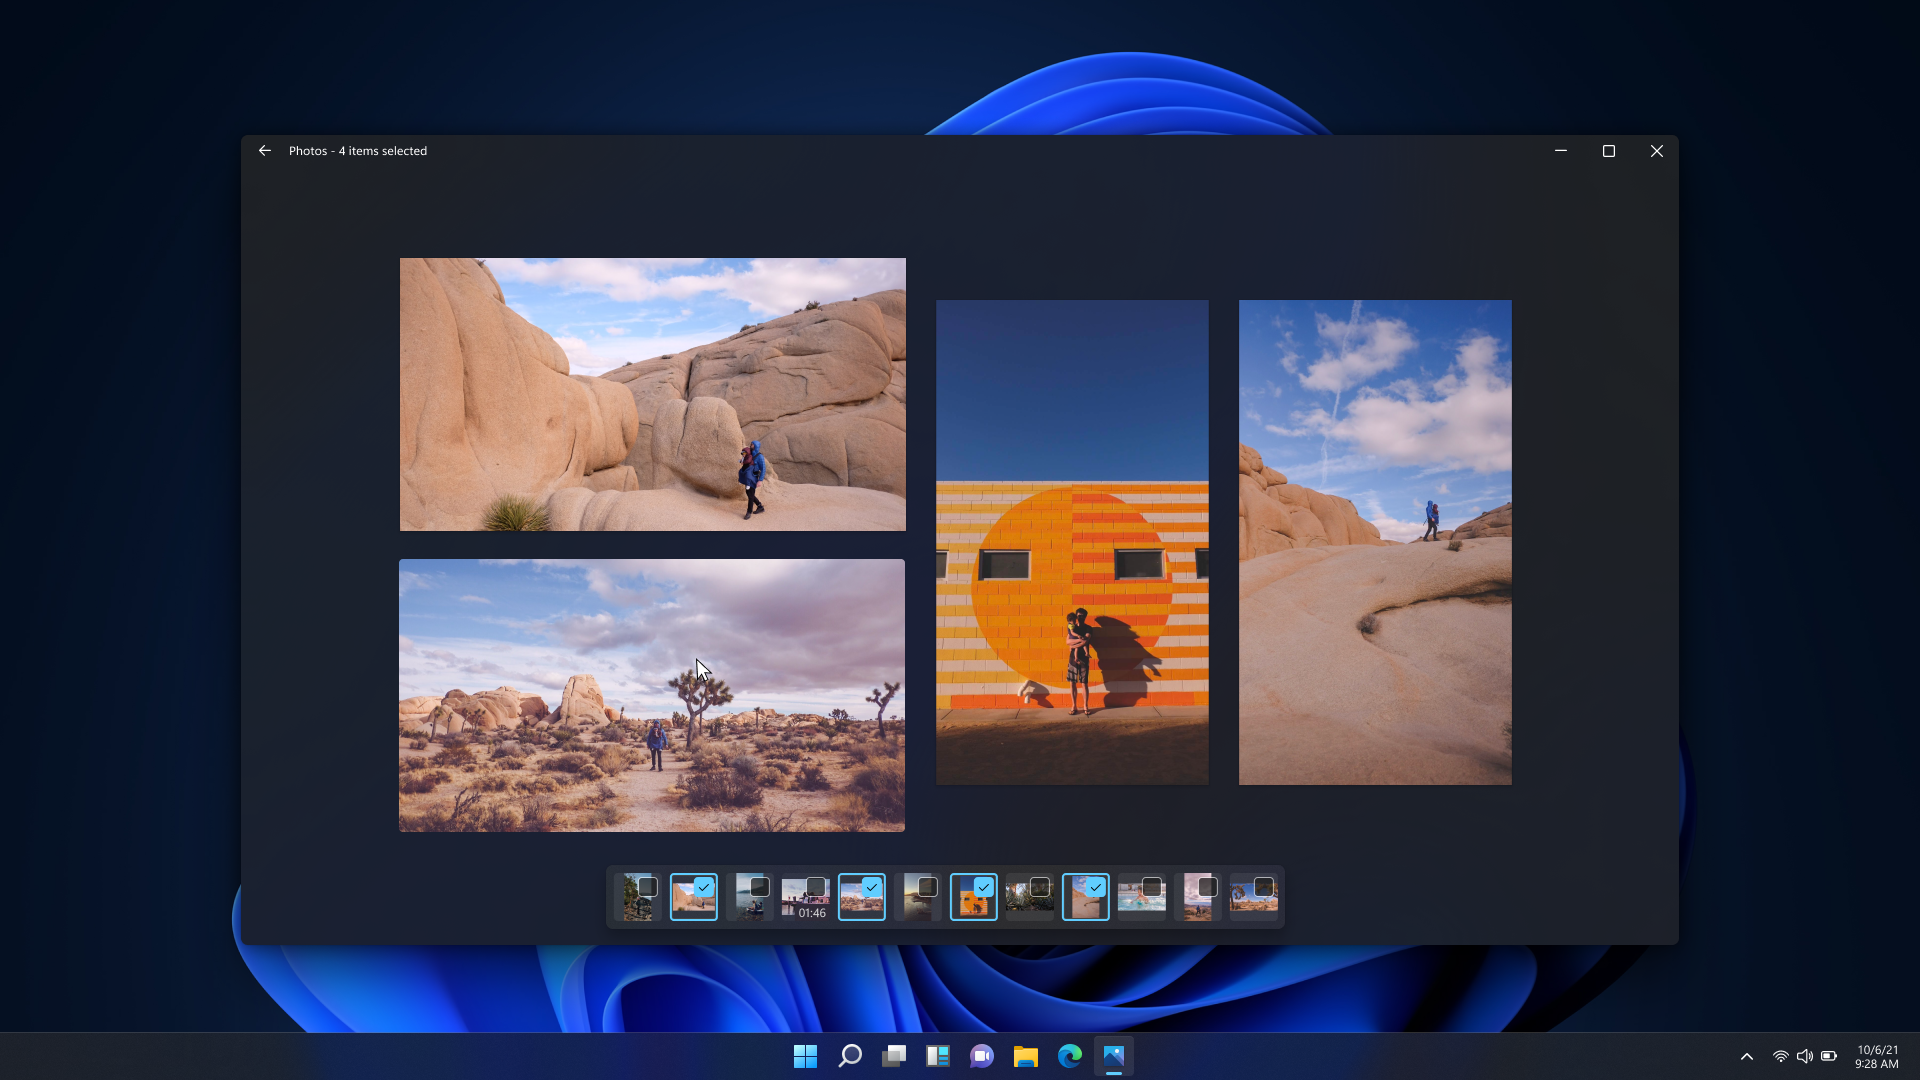 The new “multi-view” experience in the photo viewer to compare photos in the same window!